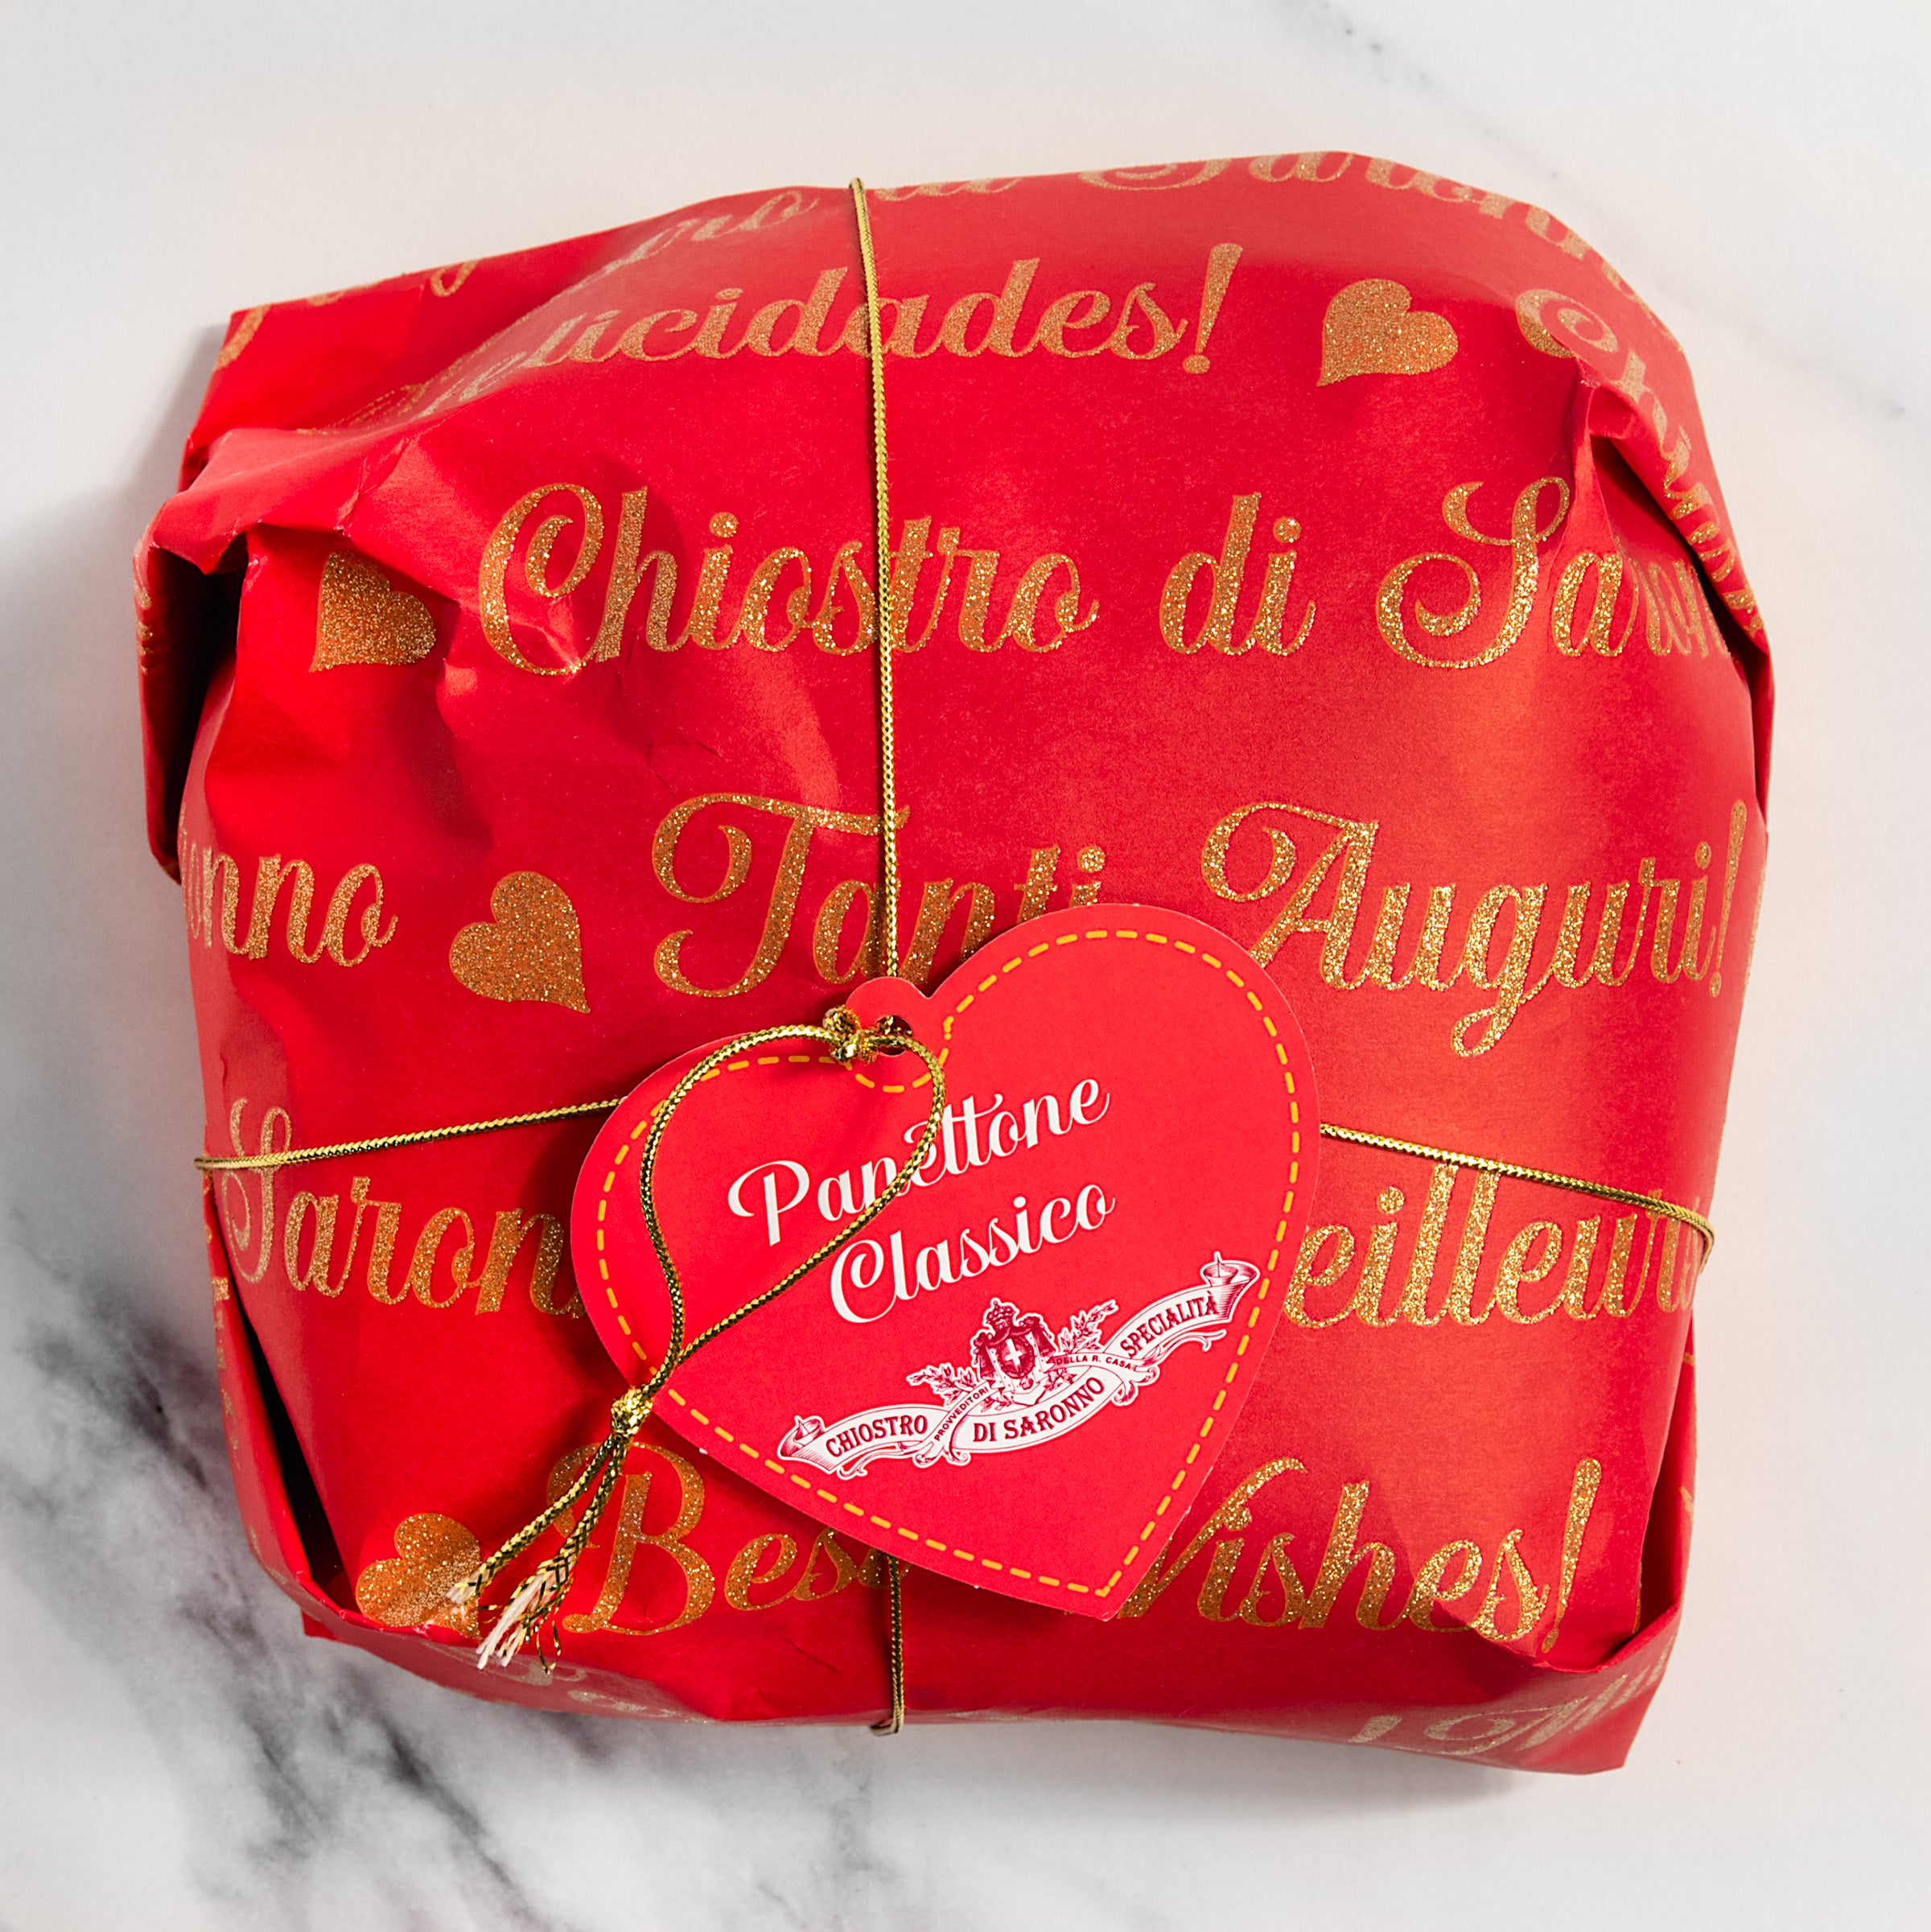 Panettone Classico with Raisins and Candied Fruits – igourmet